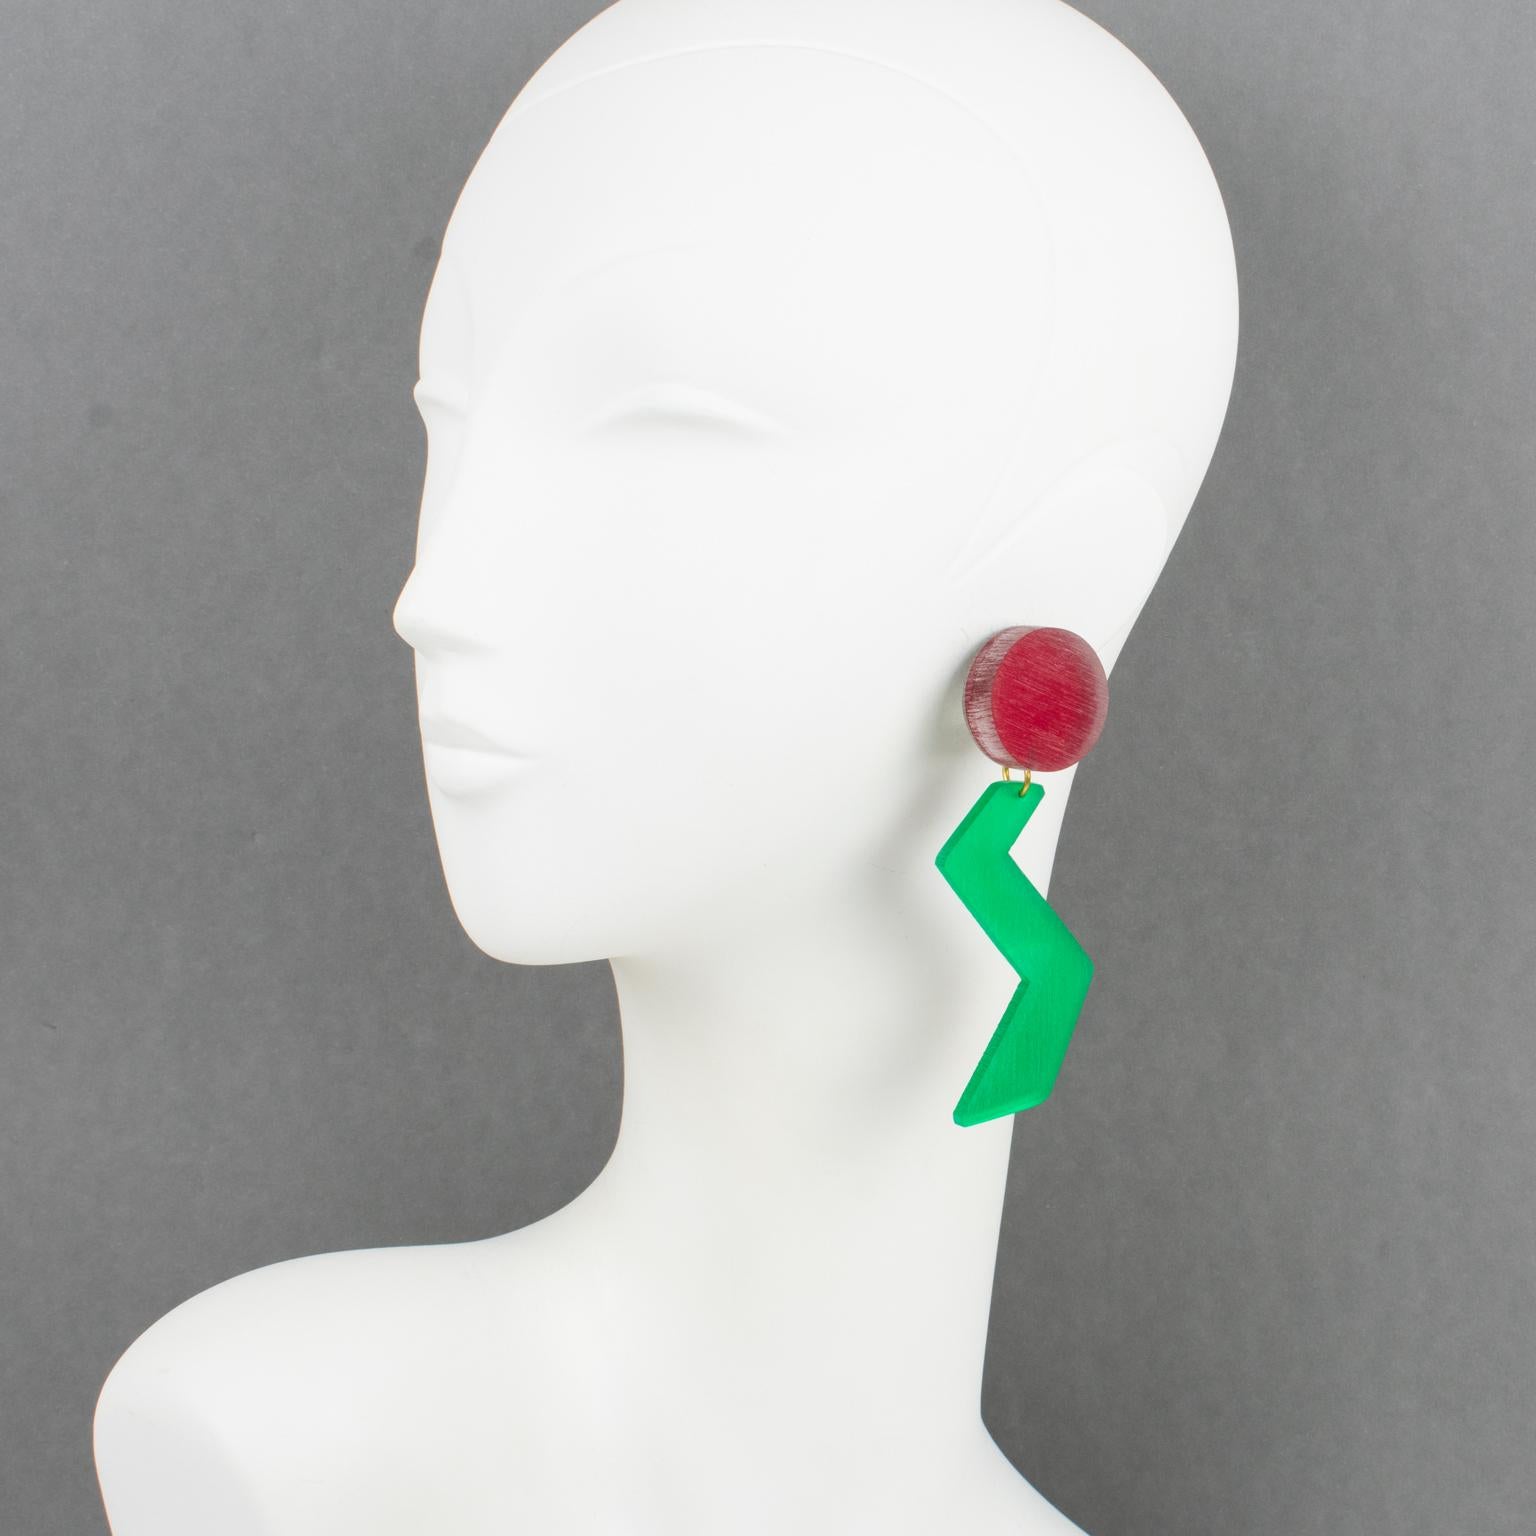 Harriet Bauknight for Kaso designed these stunning geometric Lucite dangling clip-on earrings. They feature a zigzag design, using frosted textured Lucite in assorted bright red and fresh green colors. The Kaso brand paper sticker is removed, but